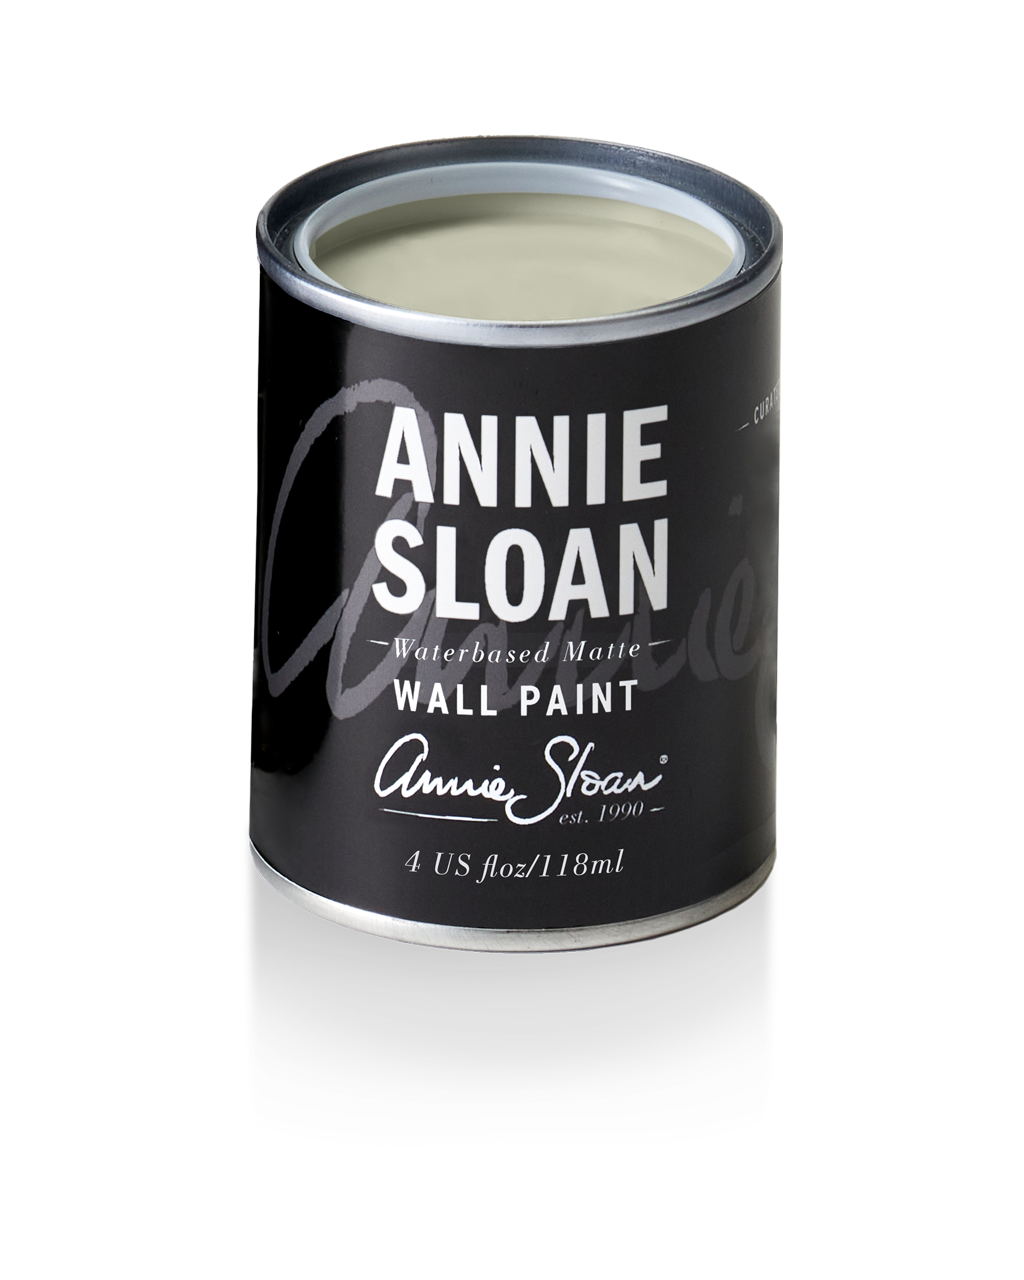 Annie Sloan Wall Paint - Cotswold Green